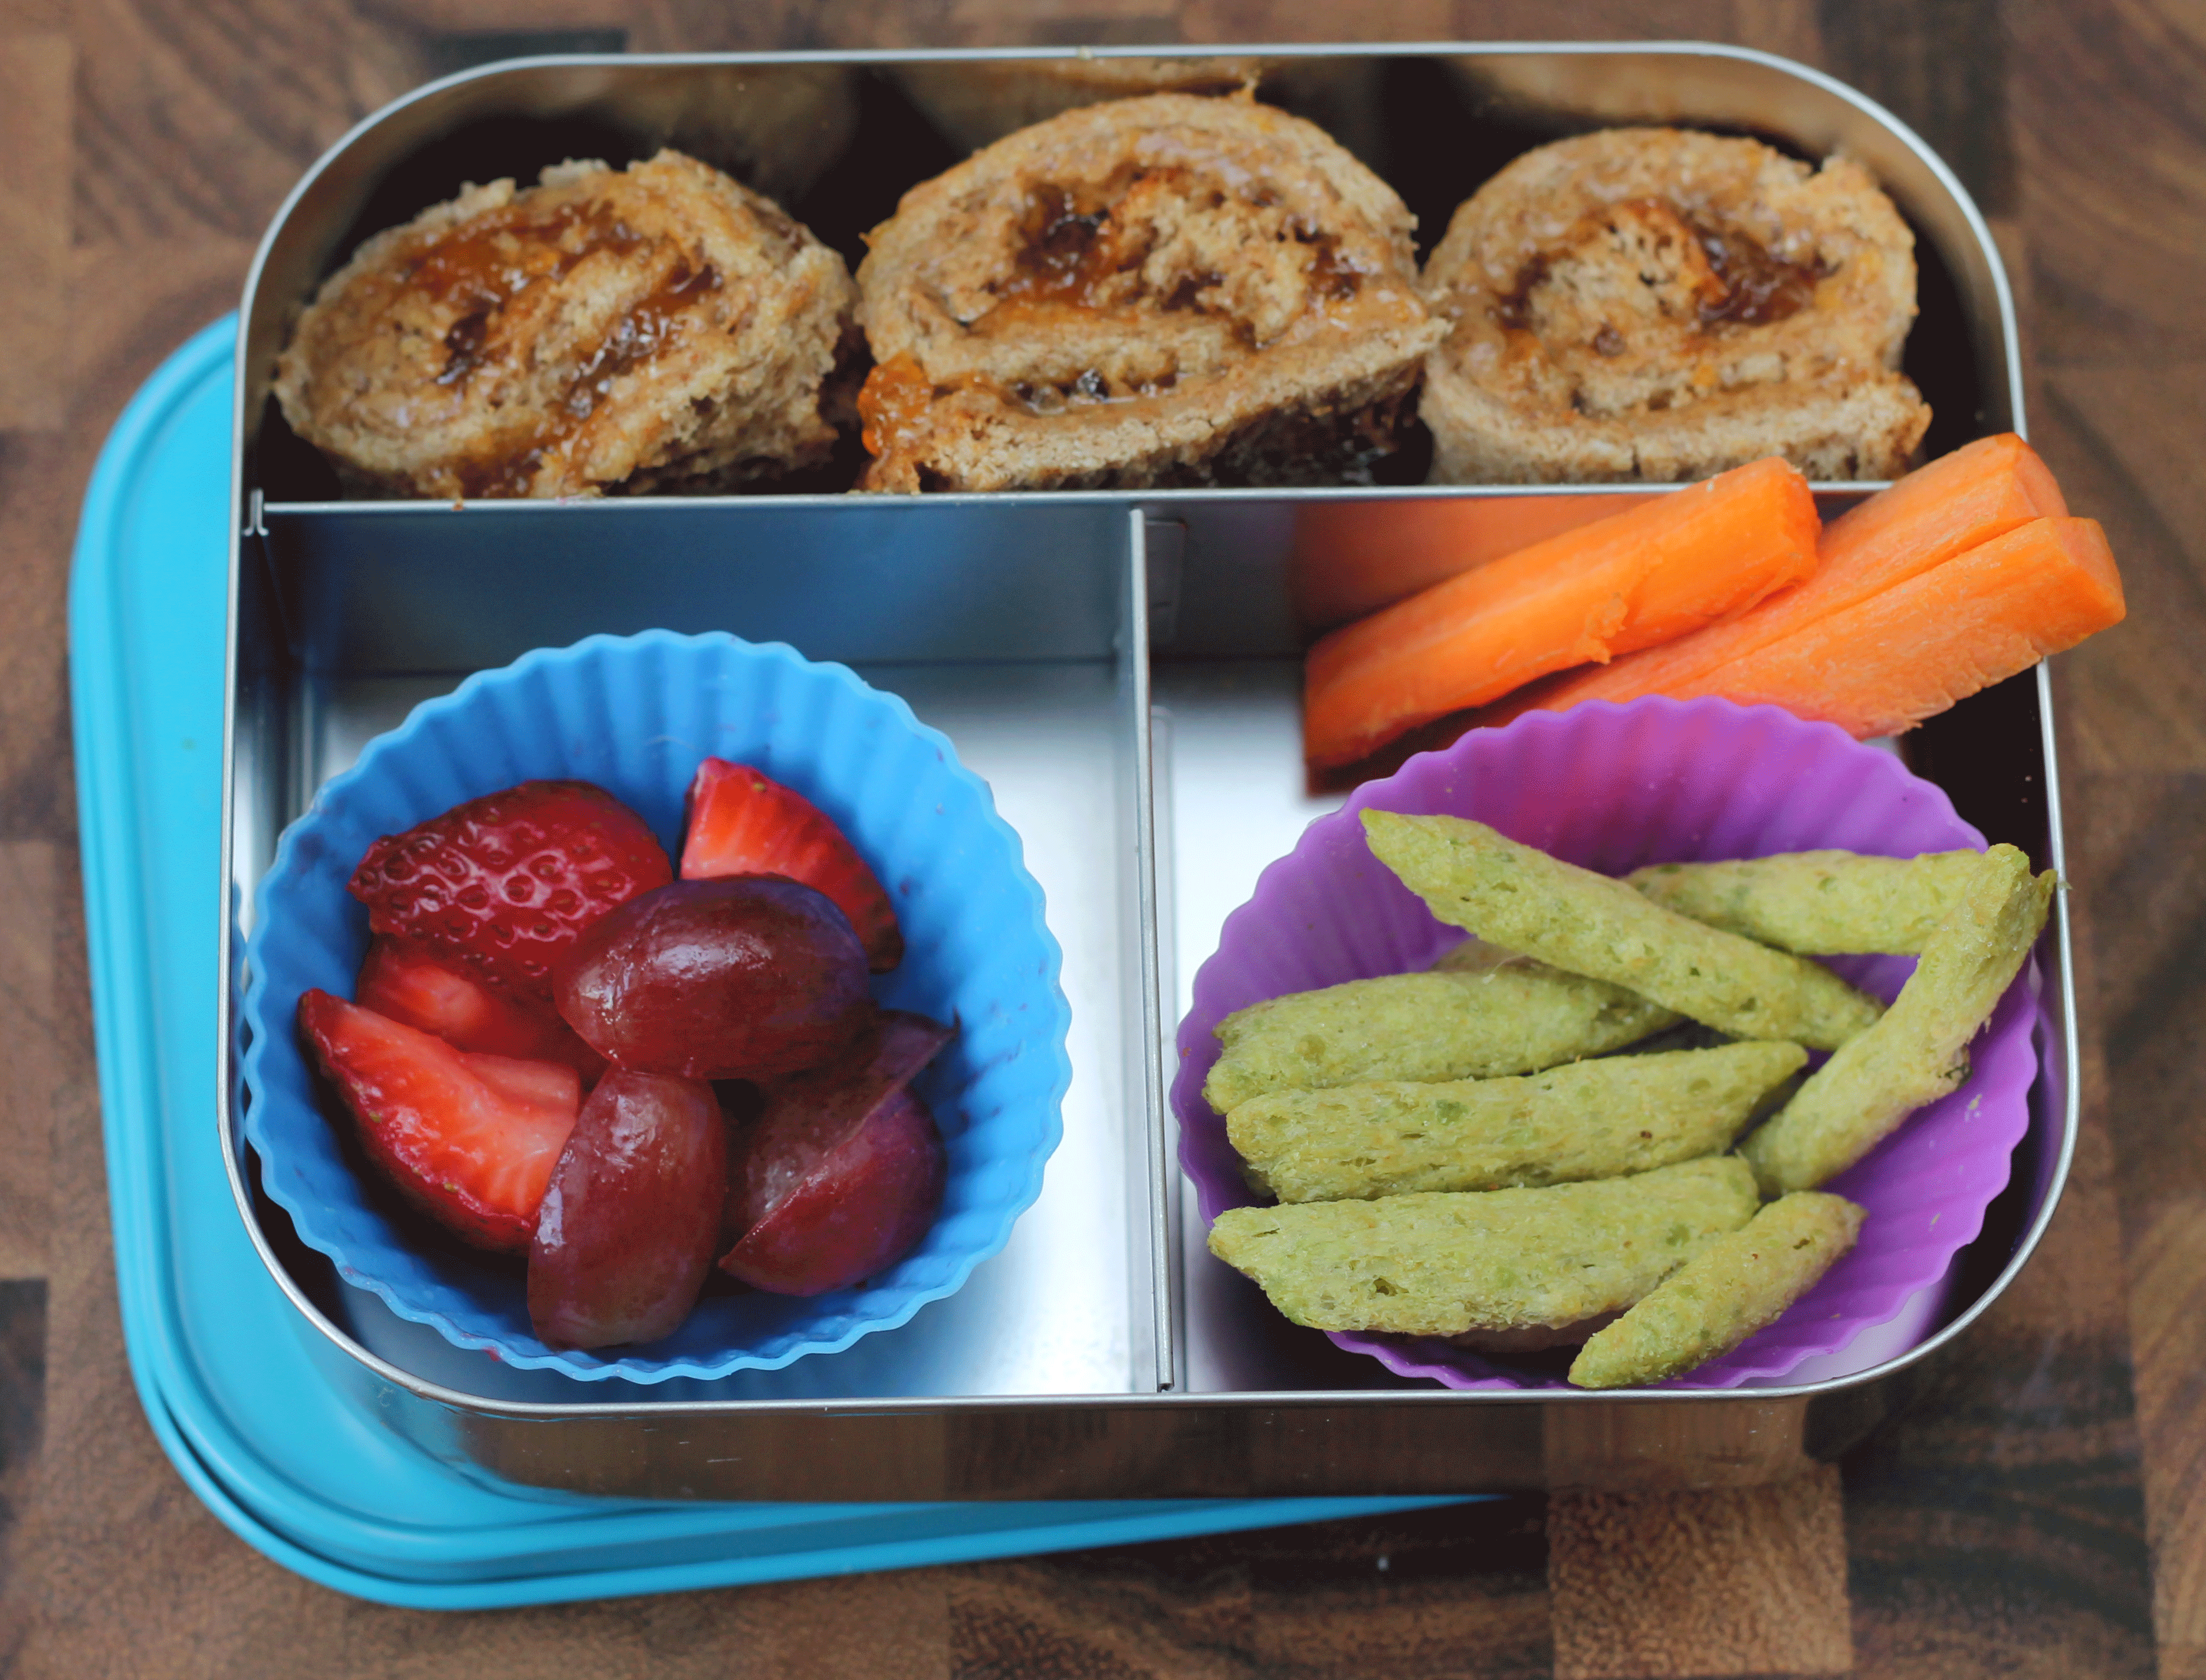 Back to School Lunch Ideas- Nut Butter and Jelly Roll Ups. A super fun take on a lunch time staple. We used almond butter and apricot preserves for a fun twist!